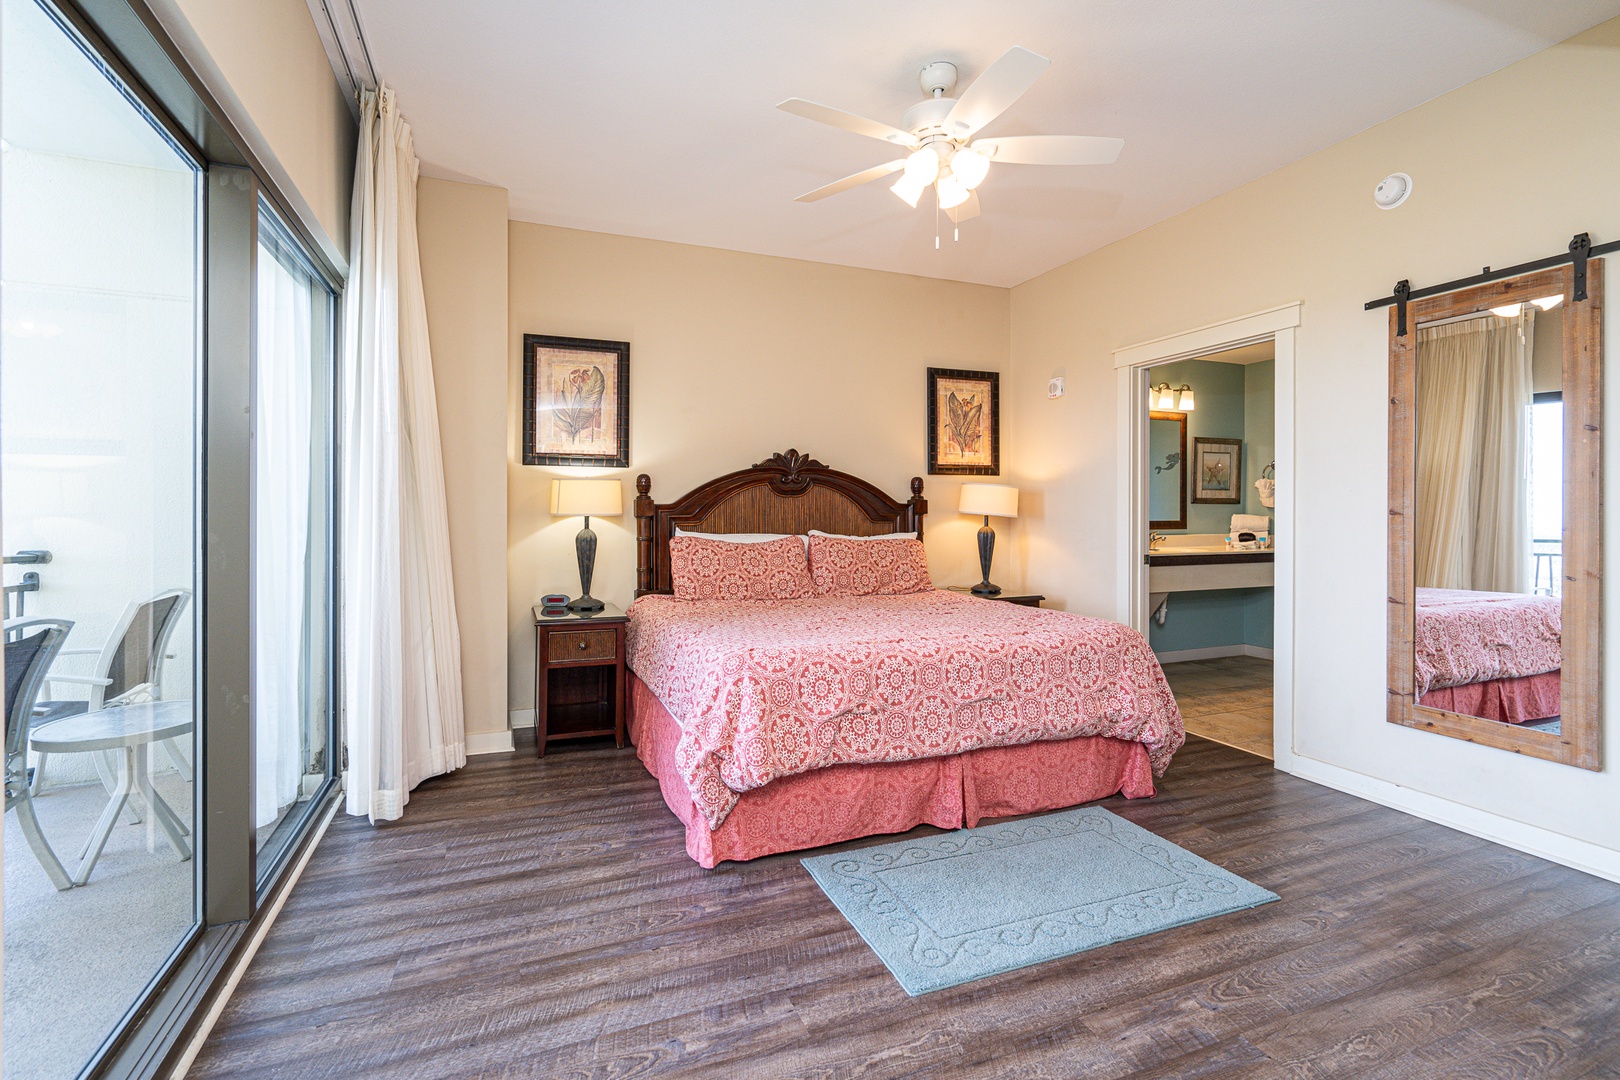 The regal king suite boasts a private ensuite, TV, & balcony access